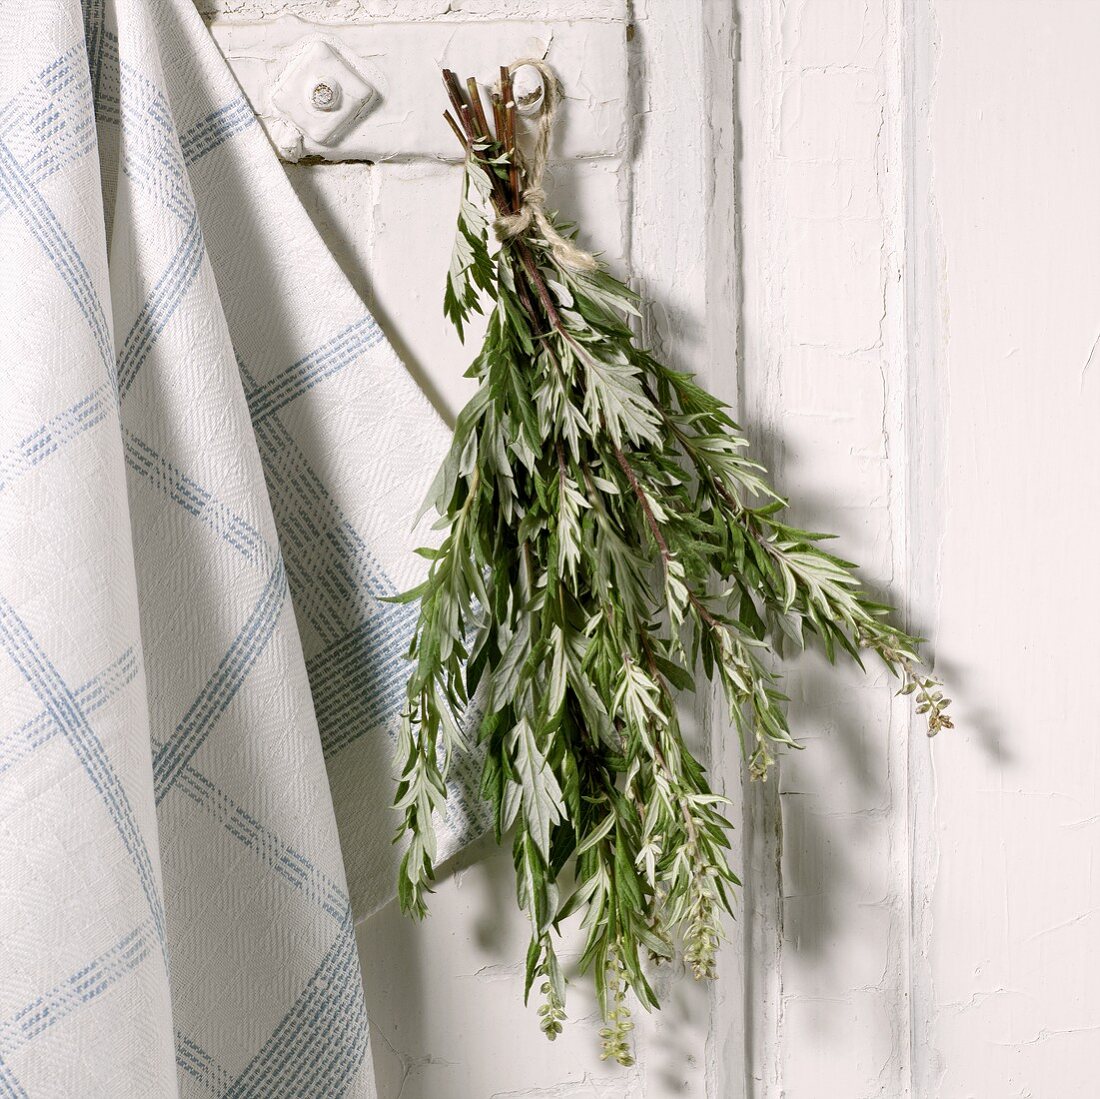 A bunch of mugwort hanging up to dry